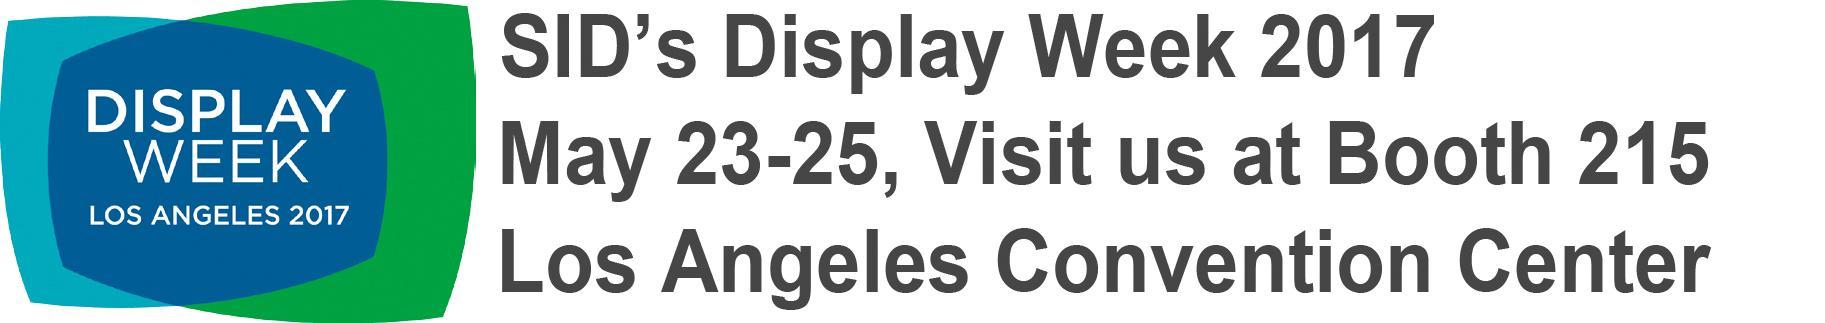 DLC Display will attend the SID2017 in Los Angeles